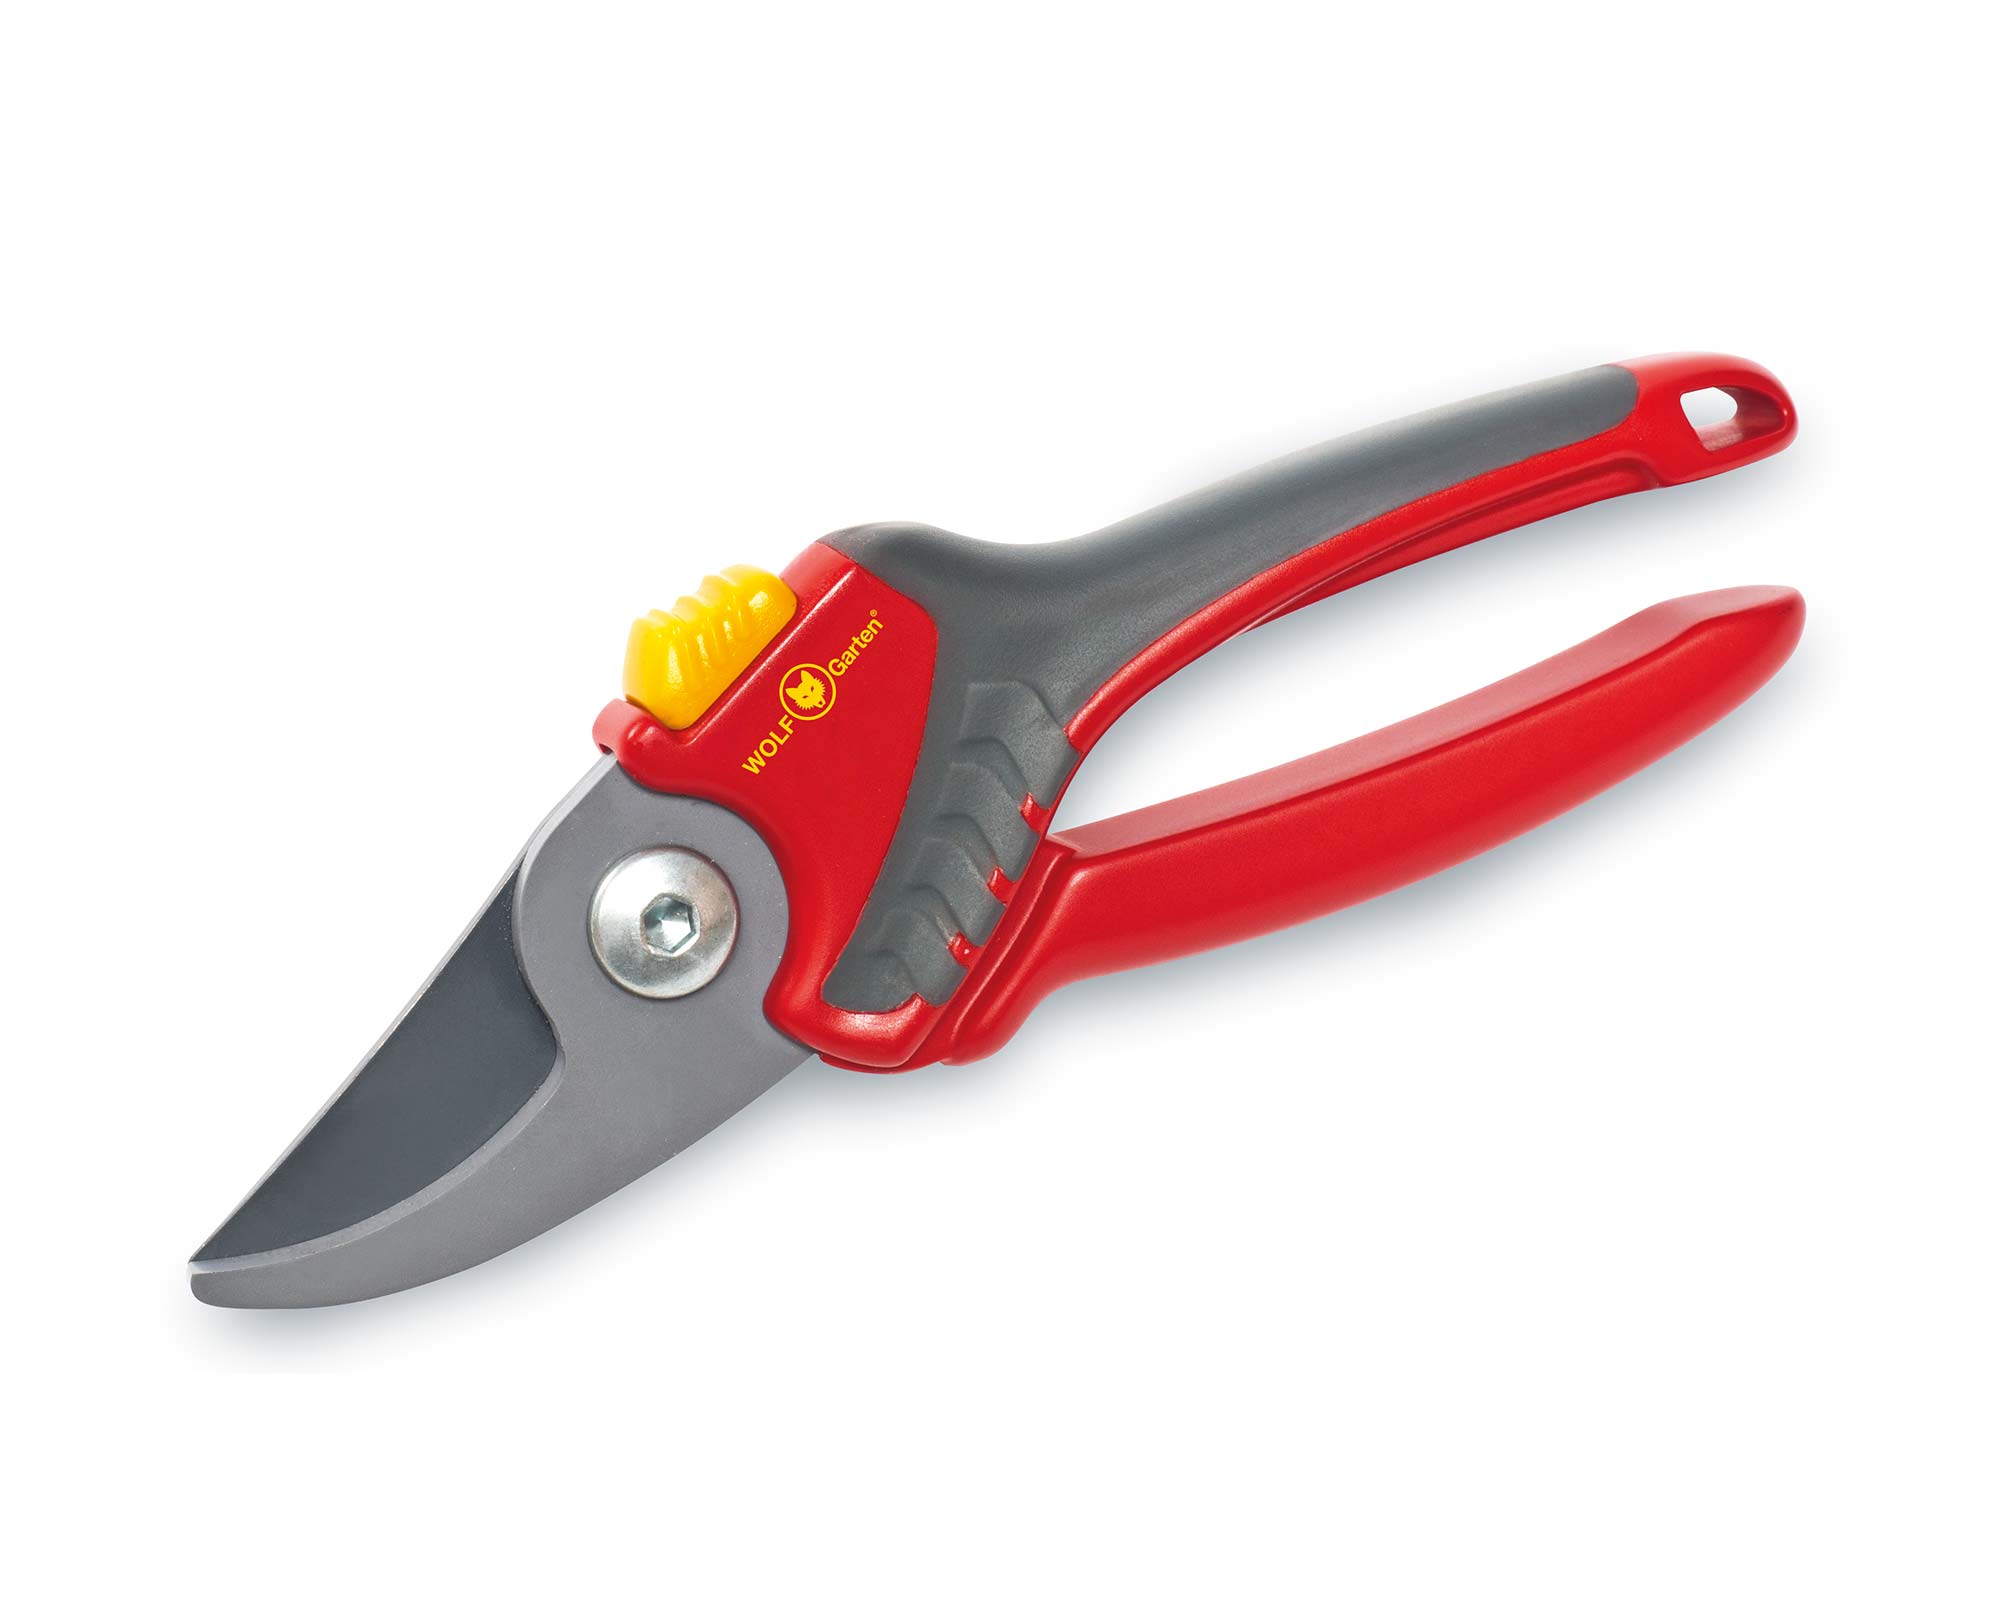 Bypass secateurs RR2500 - one of four hand tool in the Wolf Essentials Gift Pack